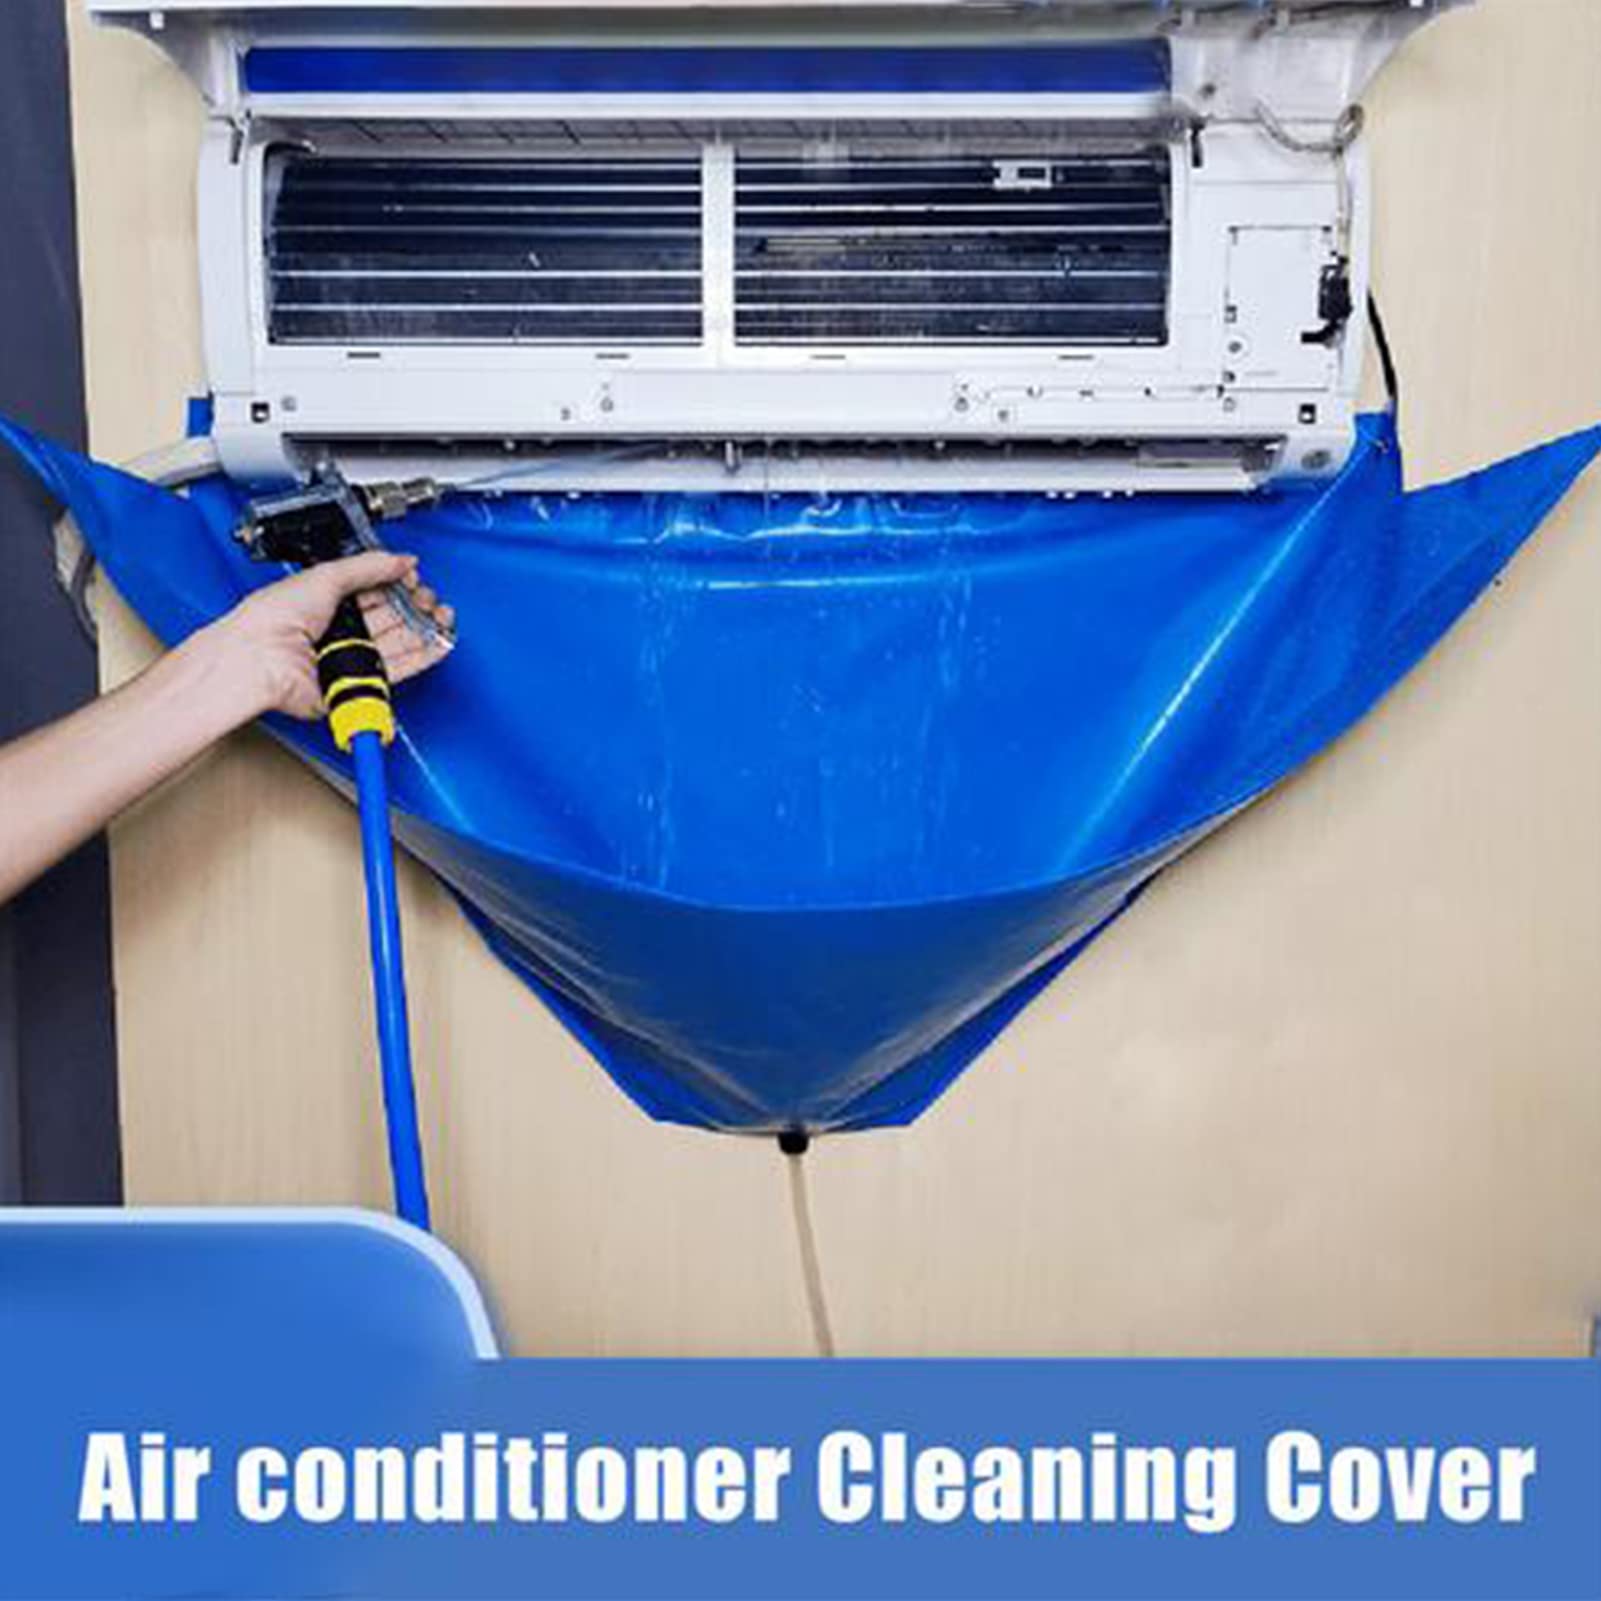 Air conditioner washing cover for ceiling cassette canvas Cleaning  Equipment & Tools Selangor, Malaysia, Kuala Lumpur (